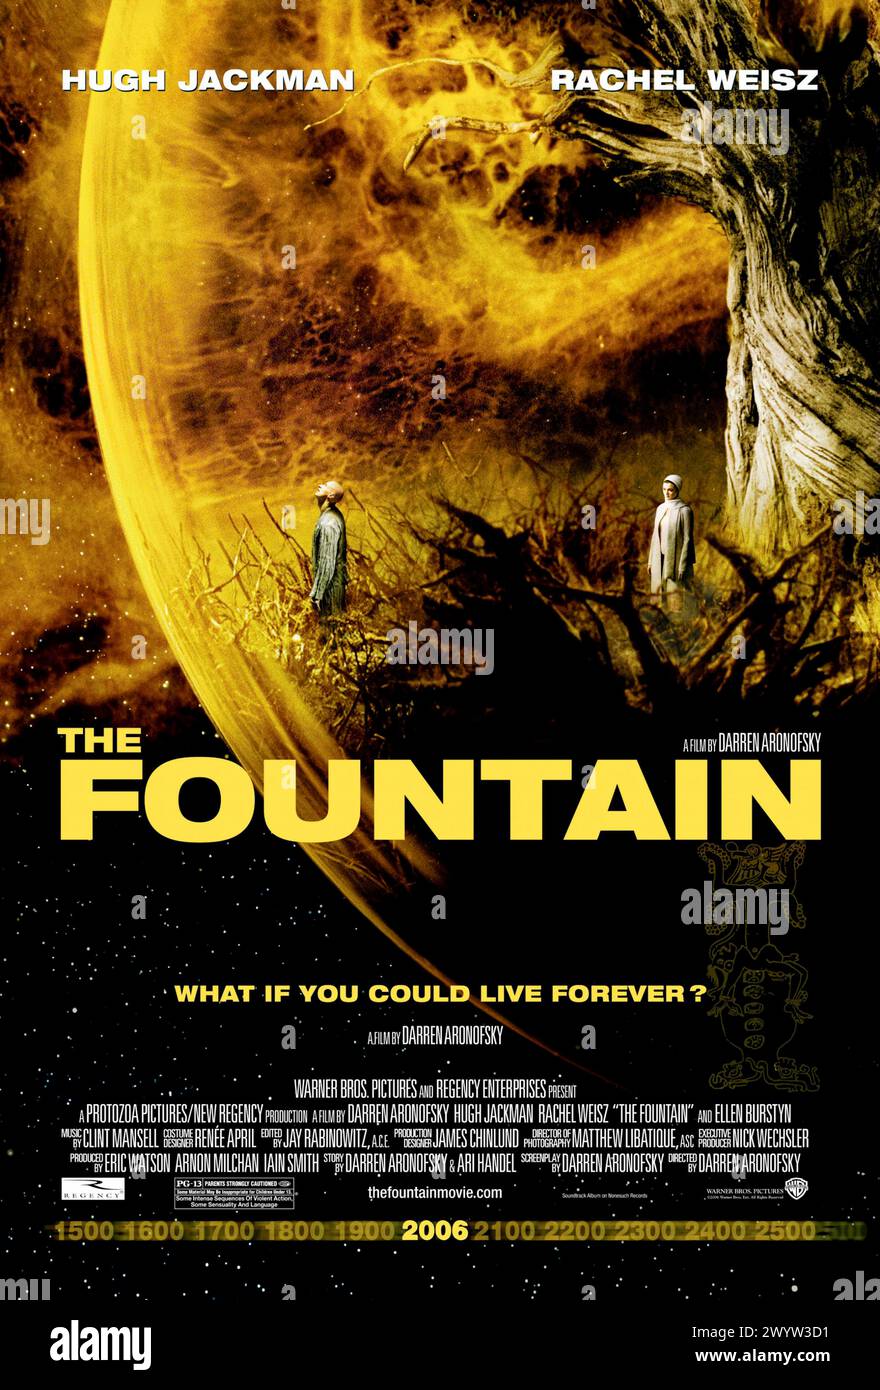 The Fountain (2006) directed by Darren Aronofsky and starring Hugh Jackman, Rachel Weisz and Sean Patrick Thomas. Three stories - one each from the past, present, and future - about men in pursuit of eternity with their love. US one sheet poster.***EDITORIAL USE ONLY*** Credit: BFA / Warner Bros Stock Photo